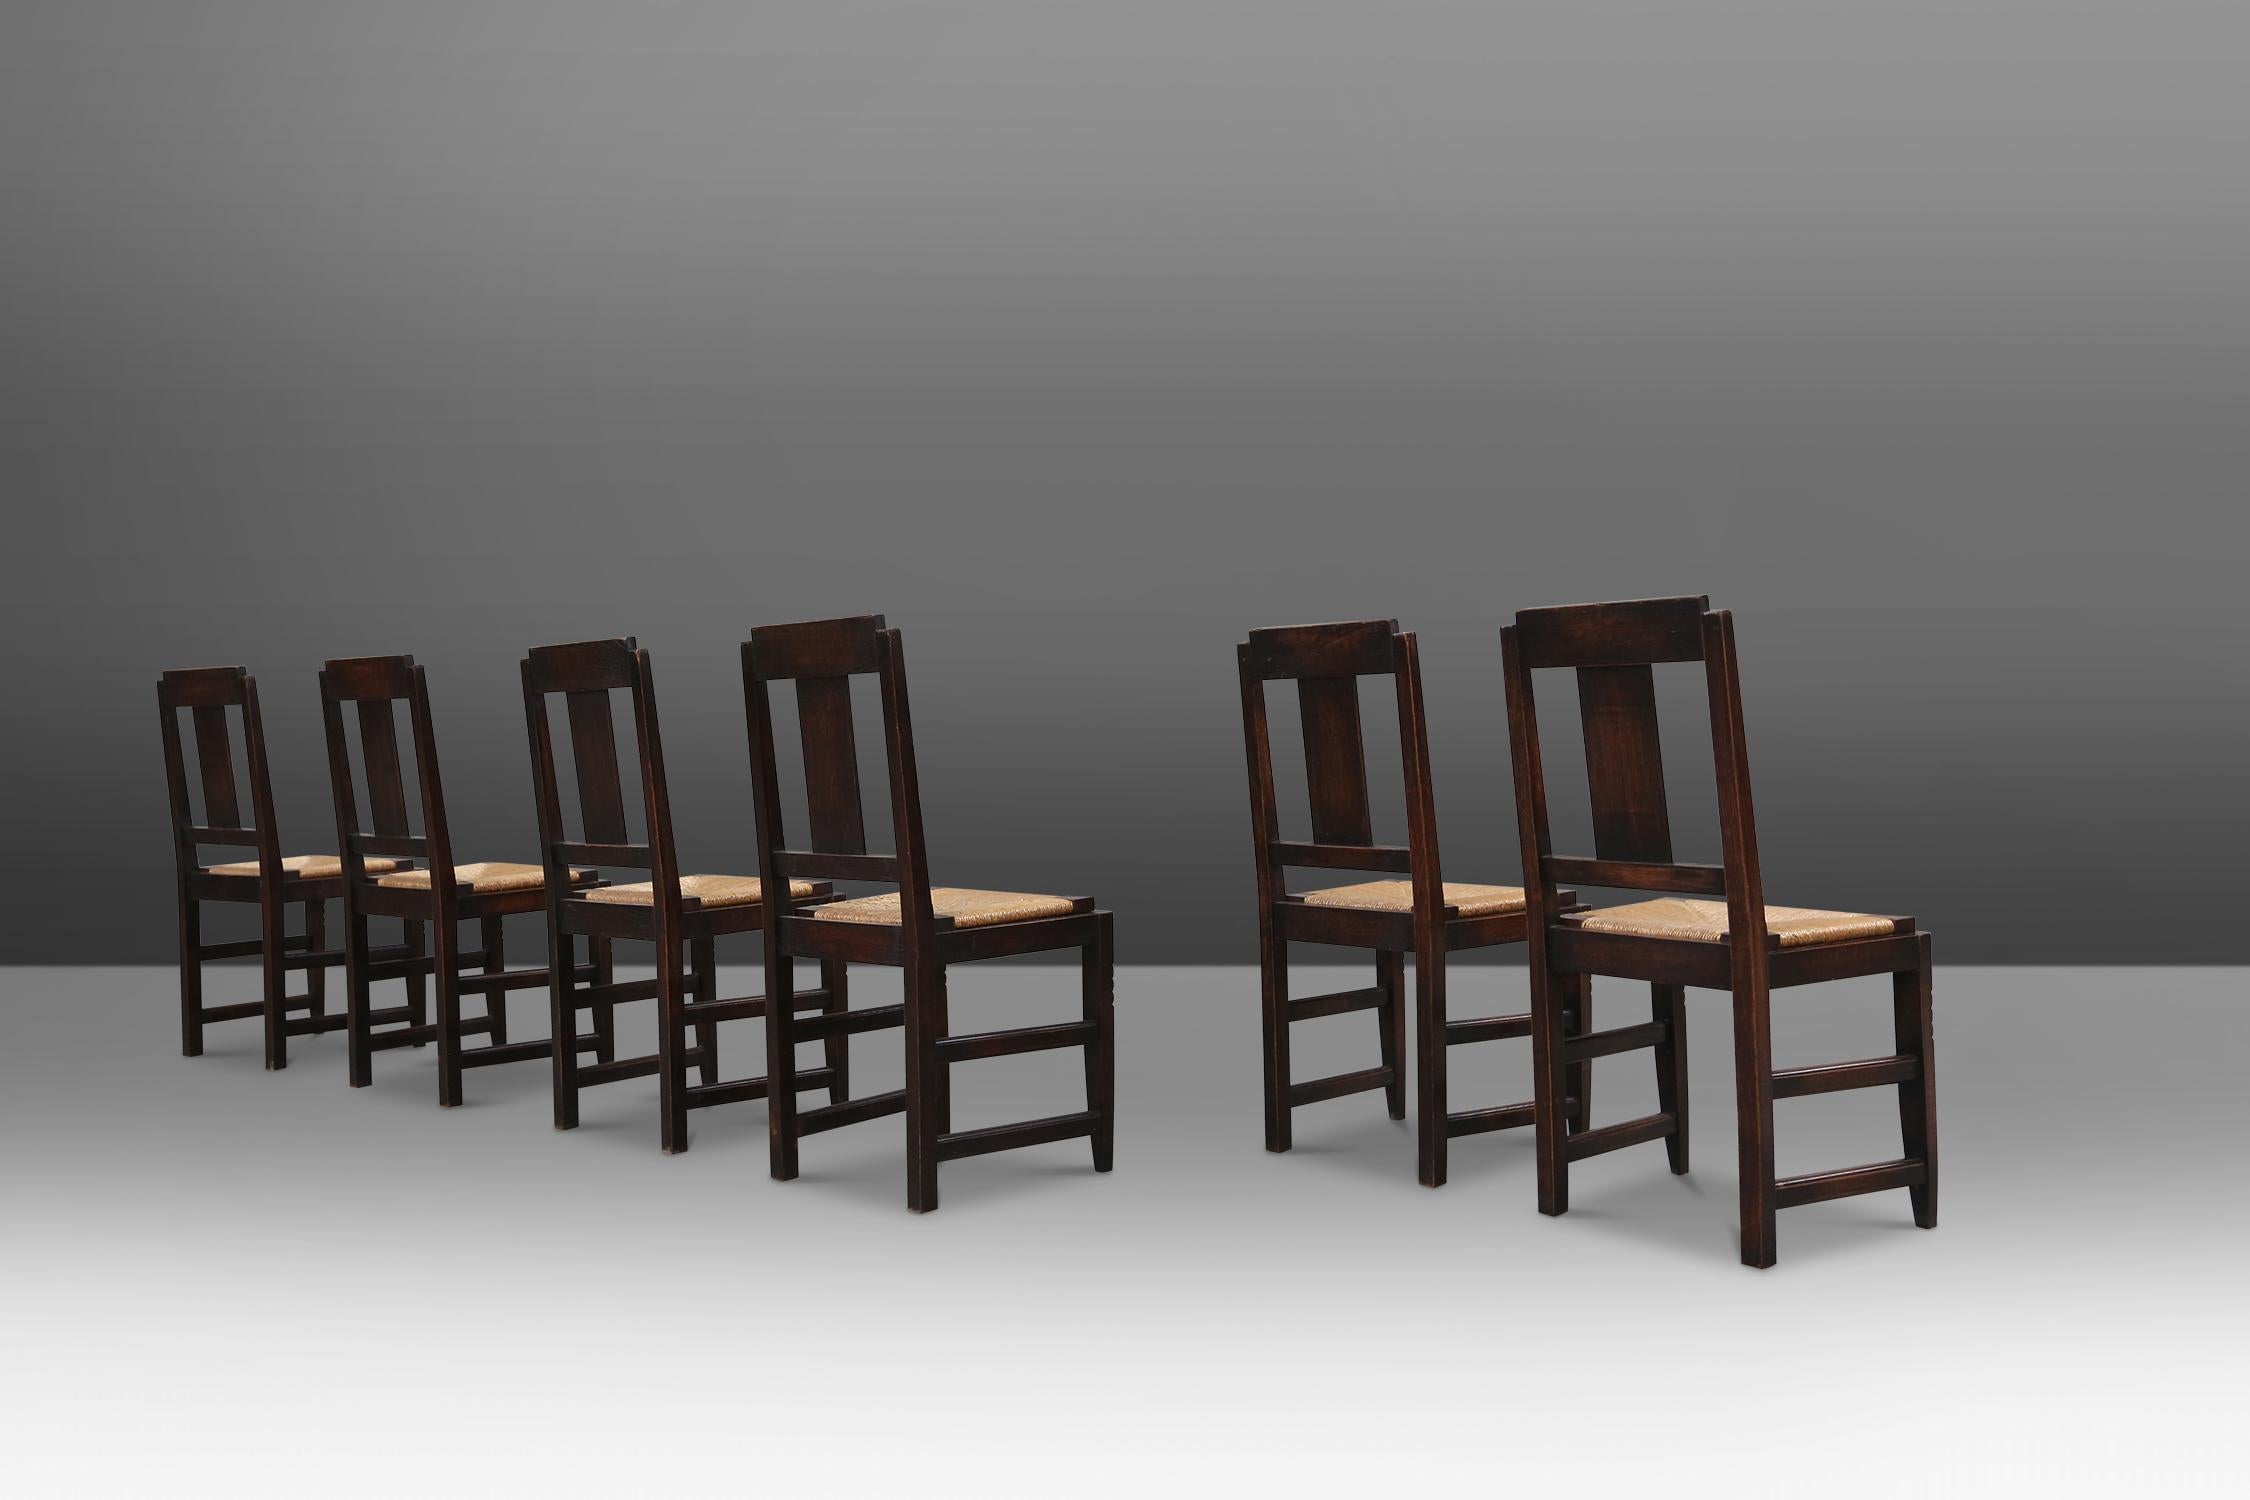 Set of six dining chairs by the french designer Victor Courtray made in the 1940's. Made of solid stained oak and a woven seat. Has some great geometrical details in the backrest and legs what gives this chairs the great Art Deco look.